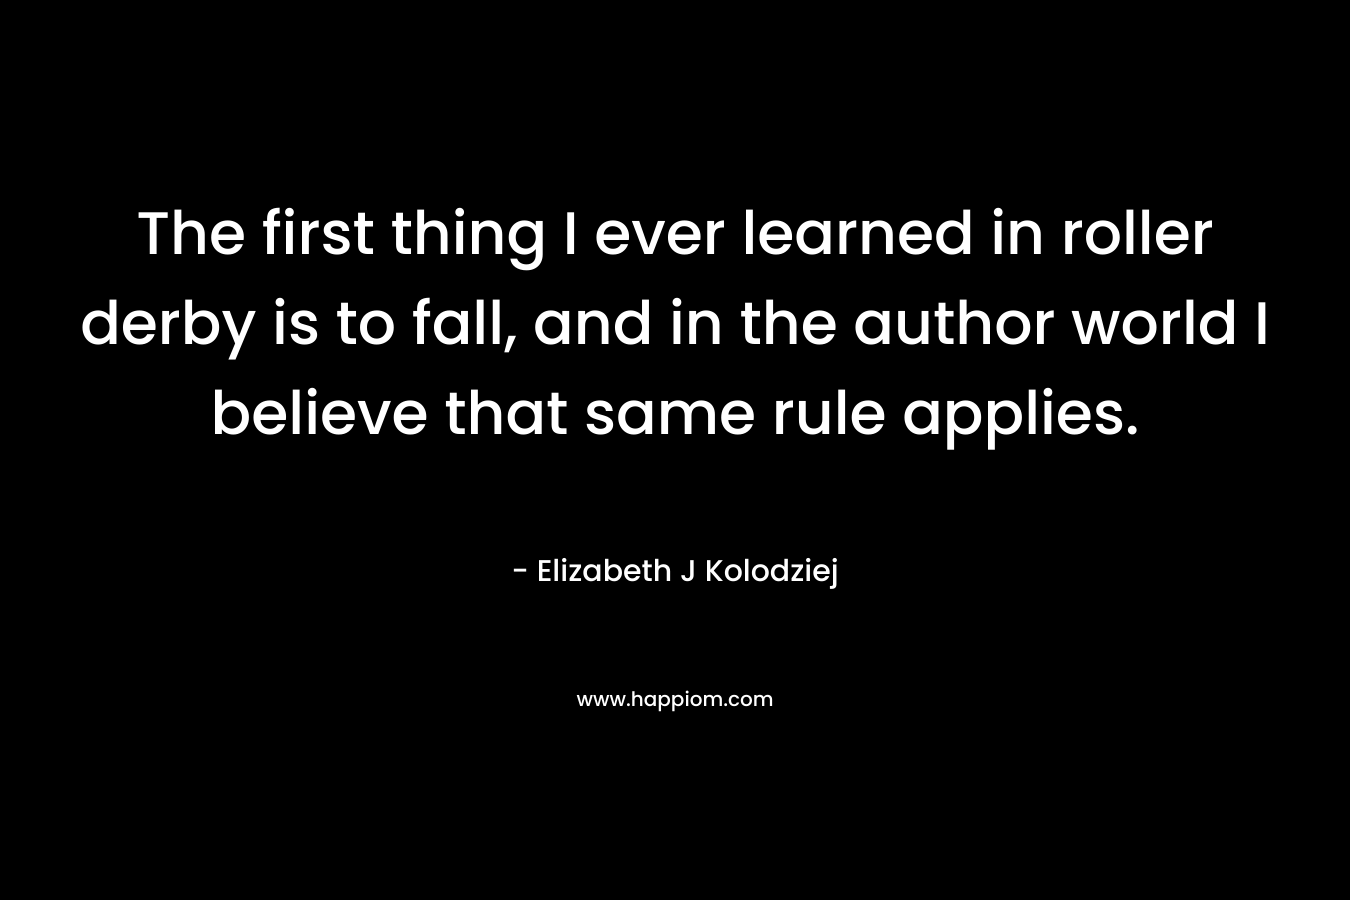 The first thing I ever learned in roller derby is to fall, and in the author world I believe that same rule applies. – Elizabeth J Kolodziej